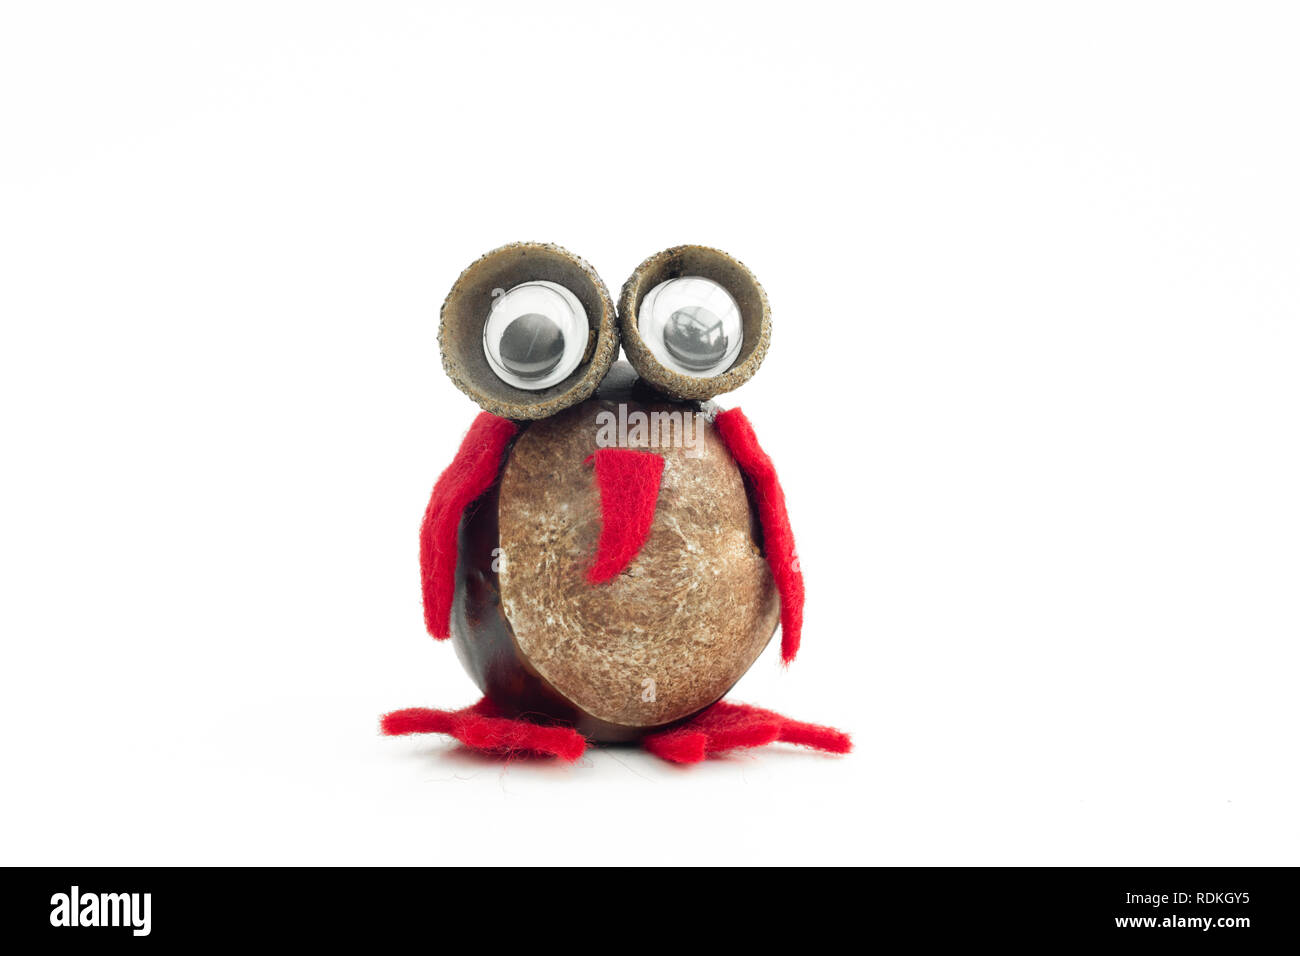 Funny owl shape character or figurine made with chestnuts in white isolated background. Stock Photo